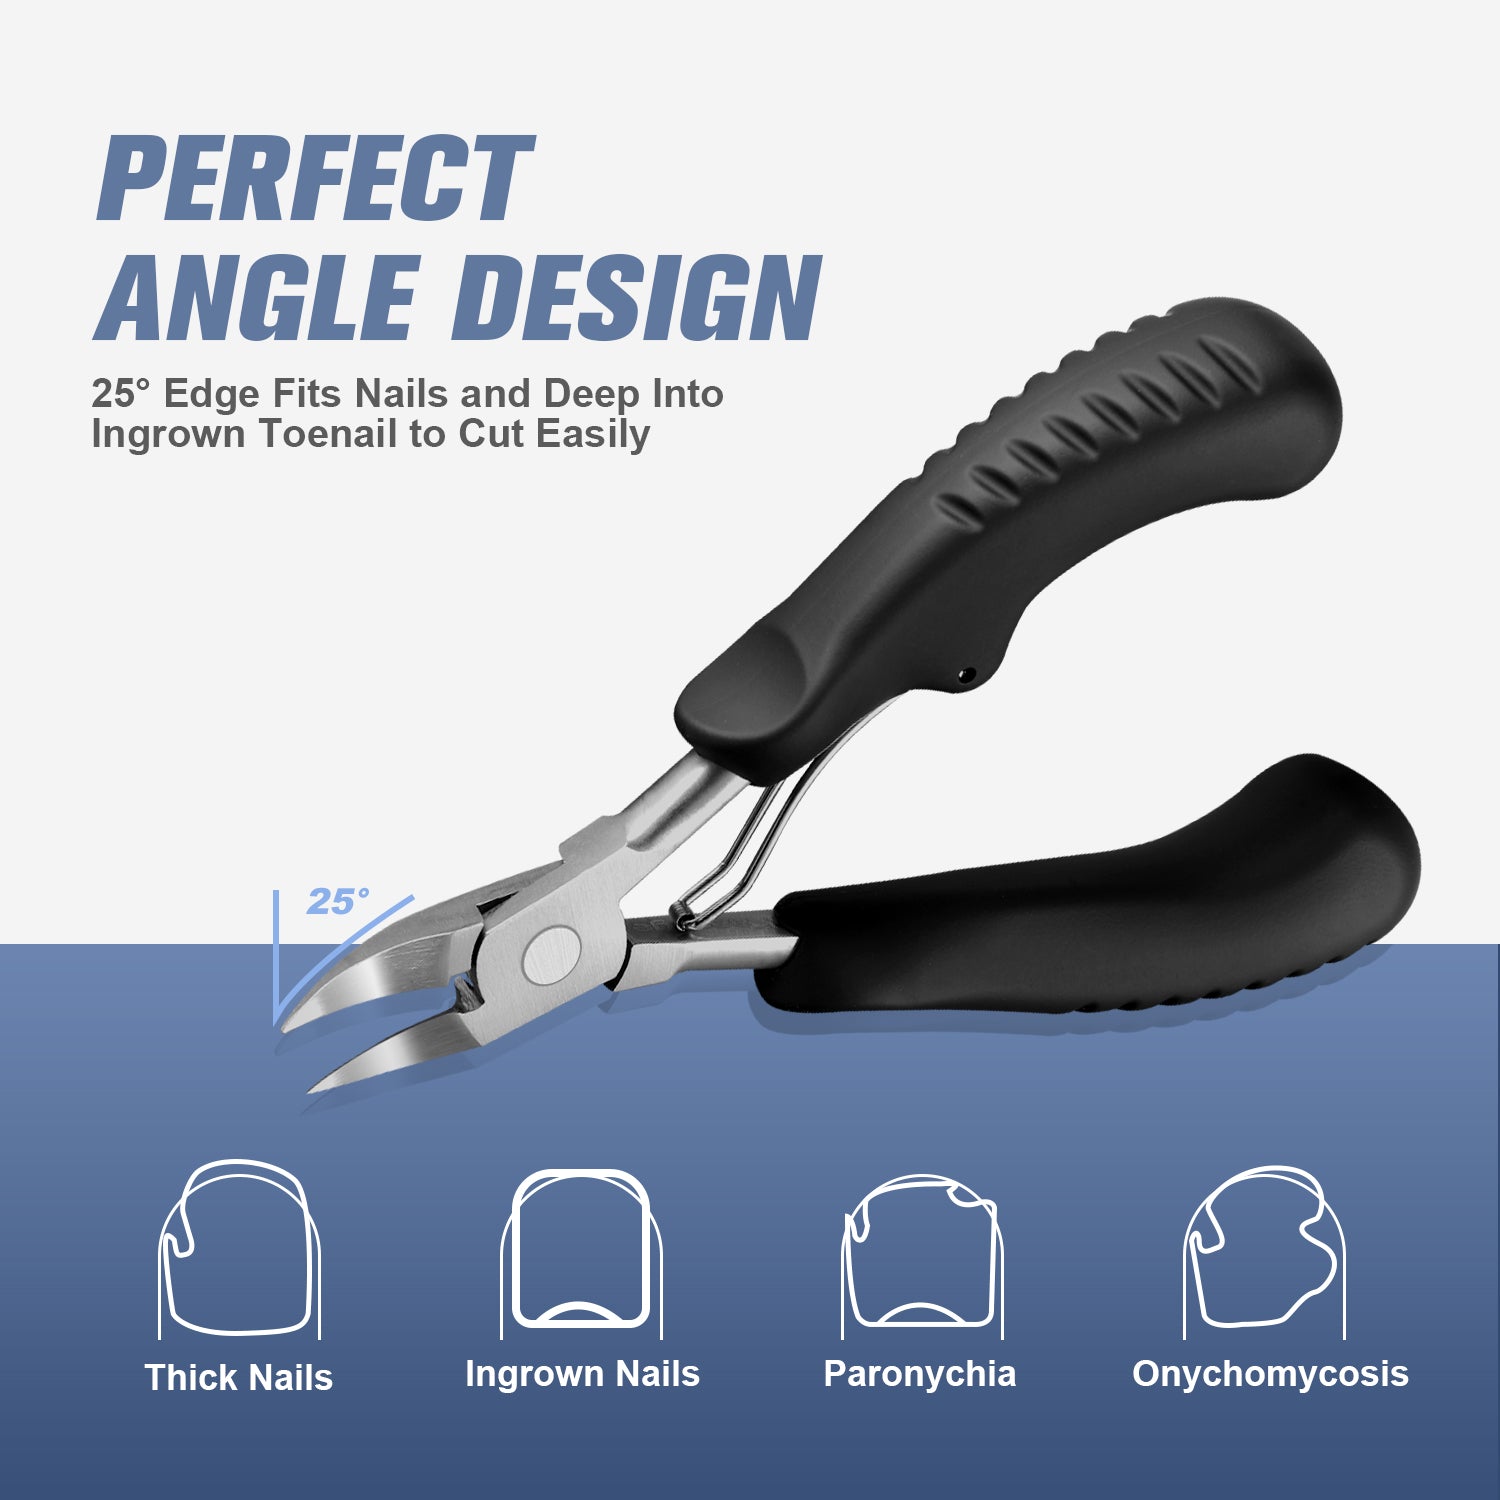 Kaasage Nail Clipper and File - Professional Nepal